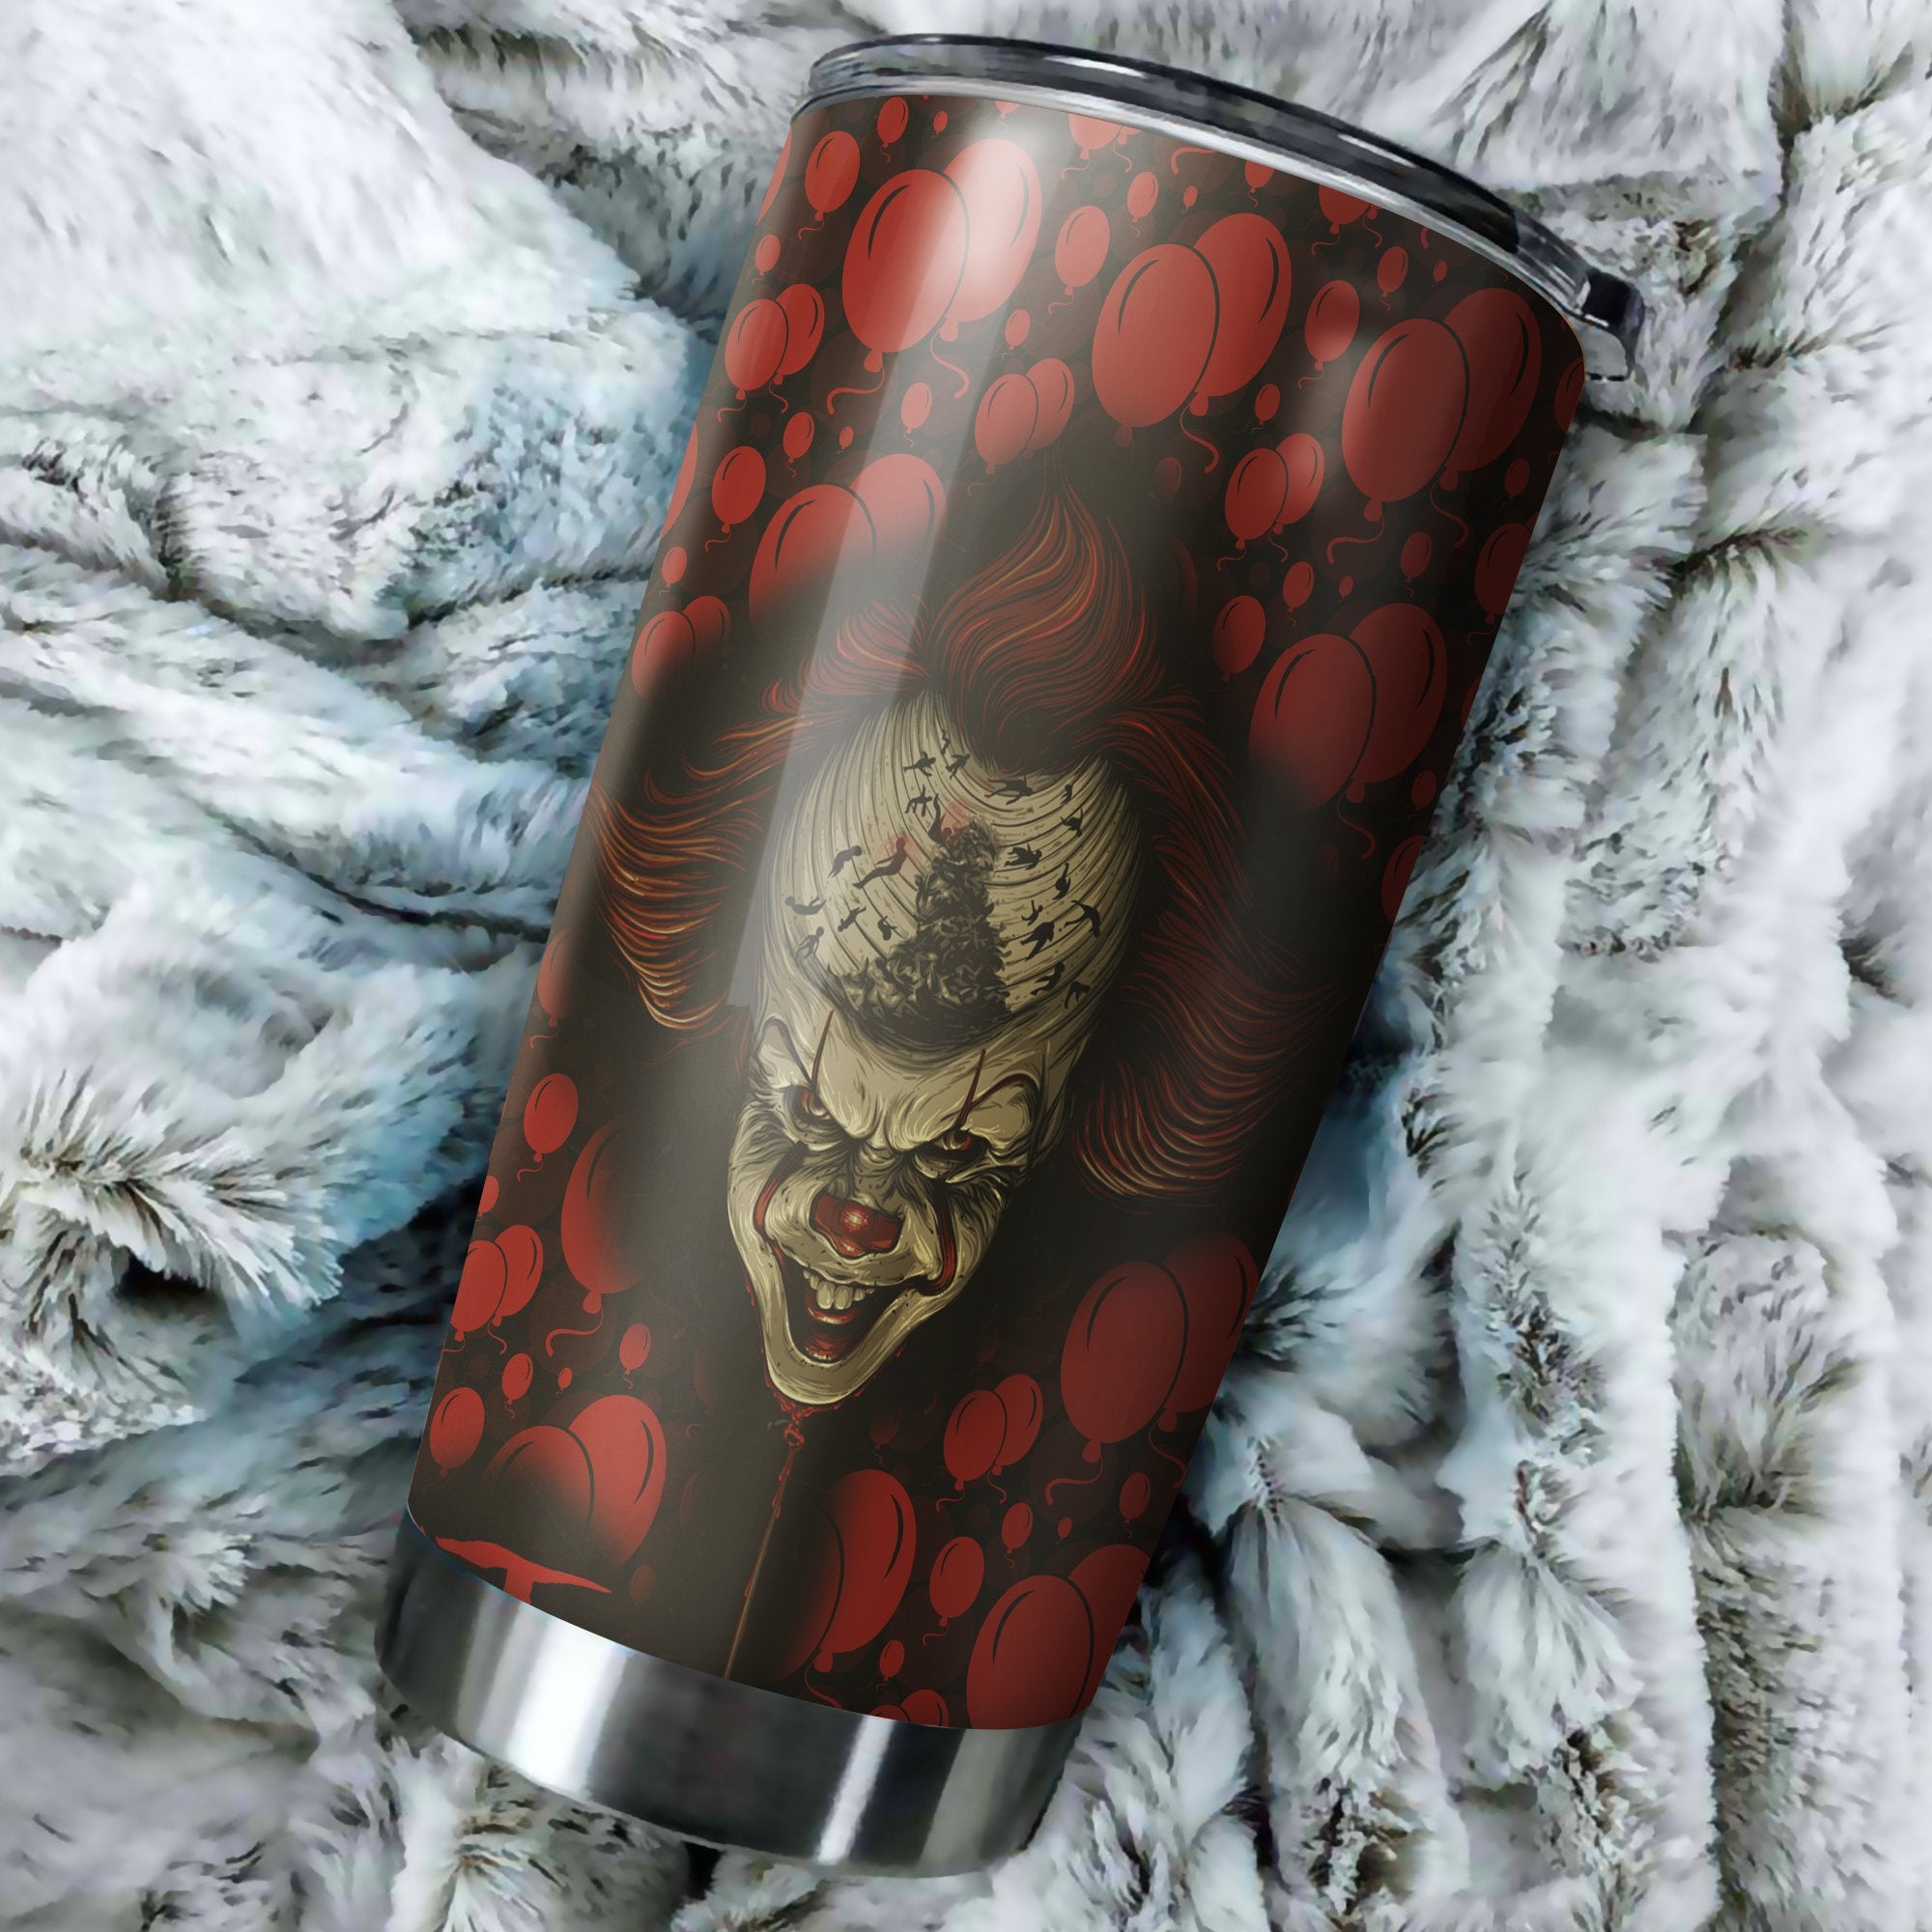 It Horror Tumbler Best Perfect Gift Idea Stainless Traveling Mugs 2021